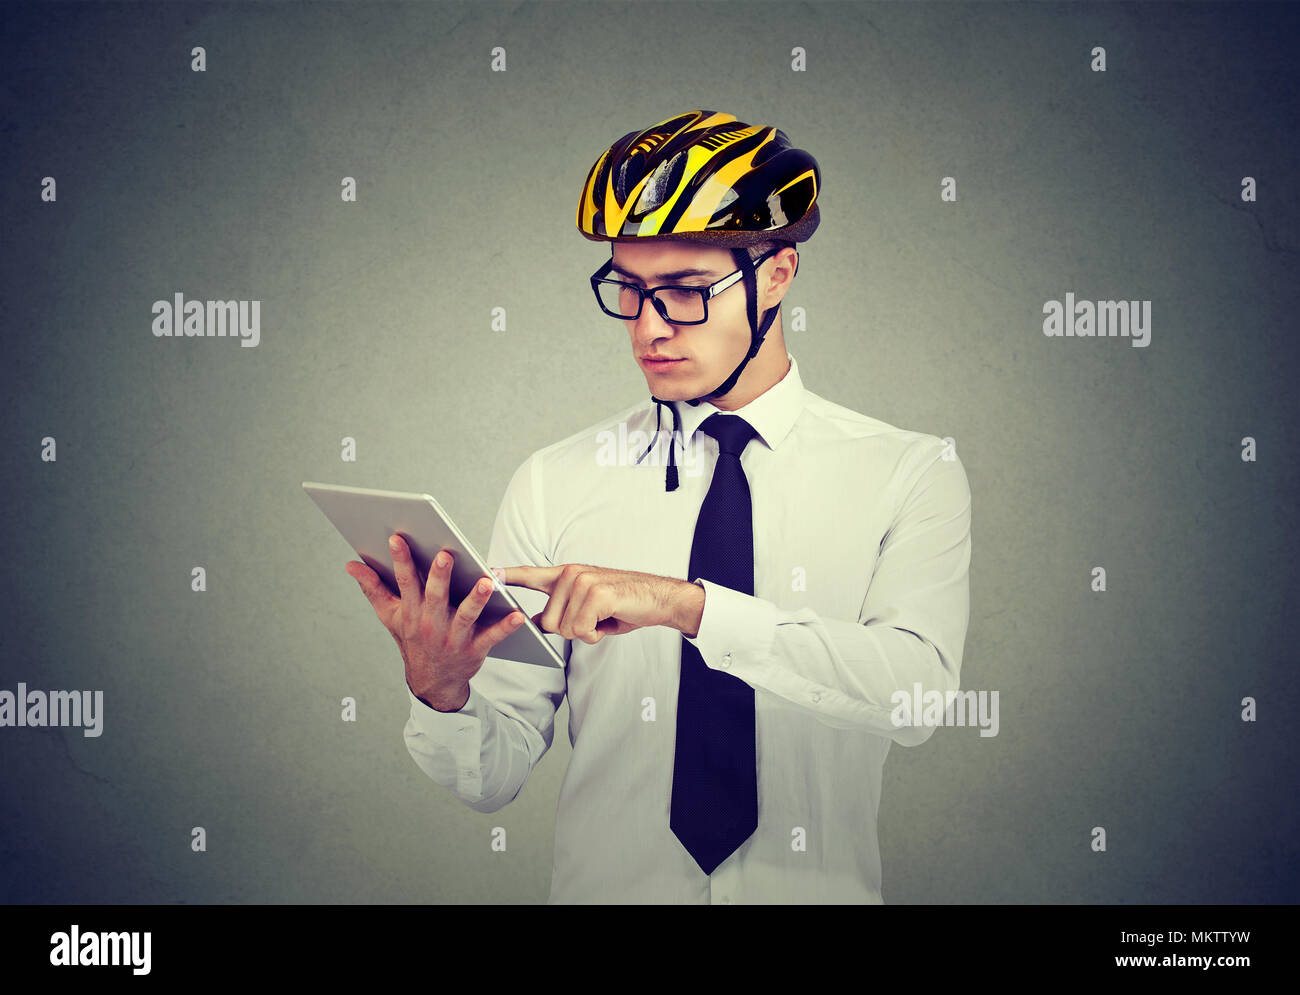 Young cautious man in helmet browsing tablet carrying out business safely. Stock Photo